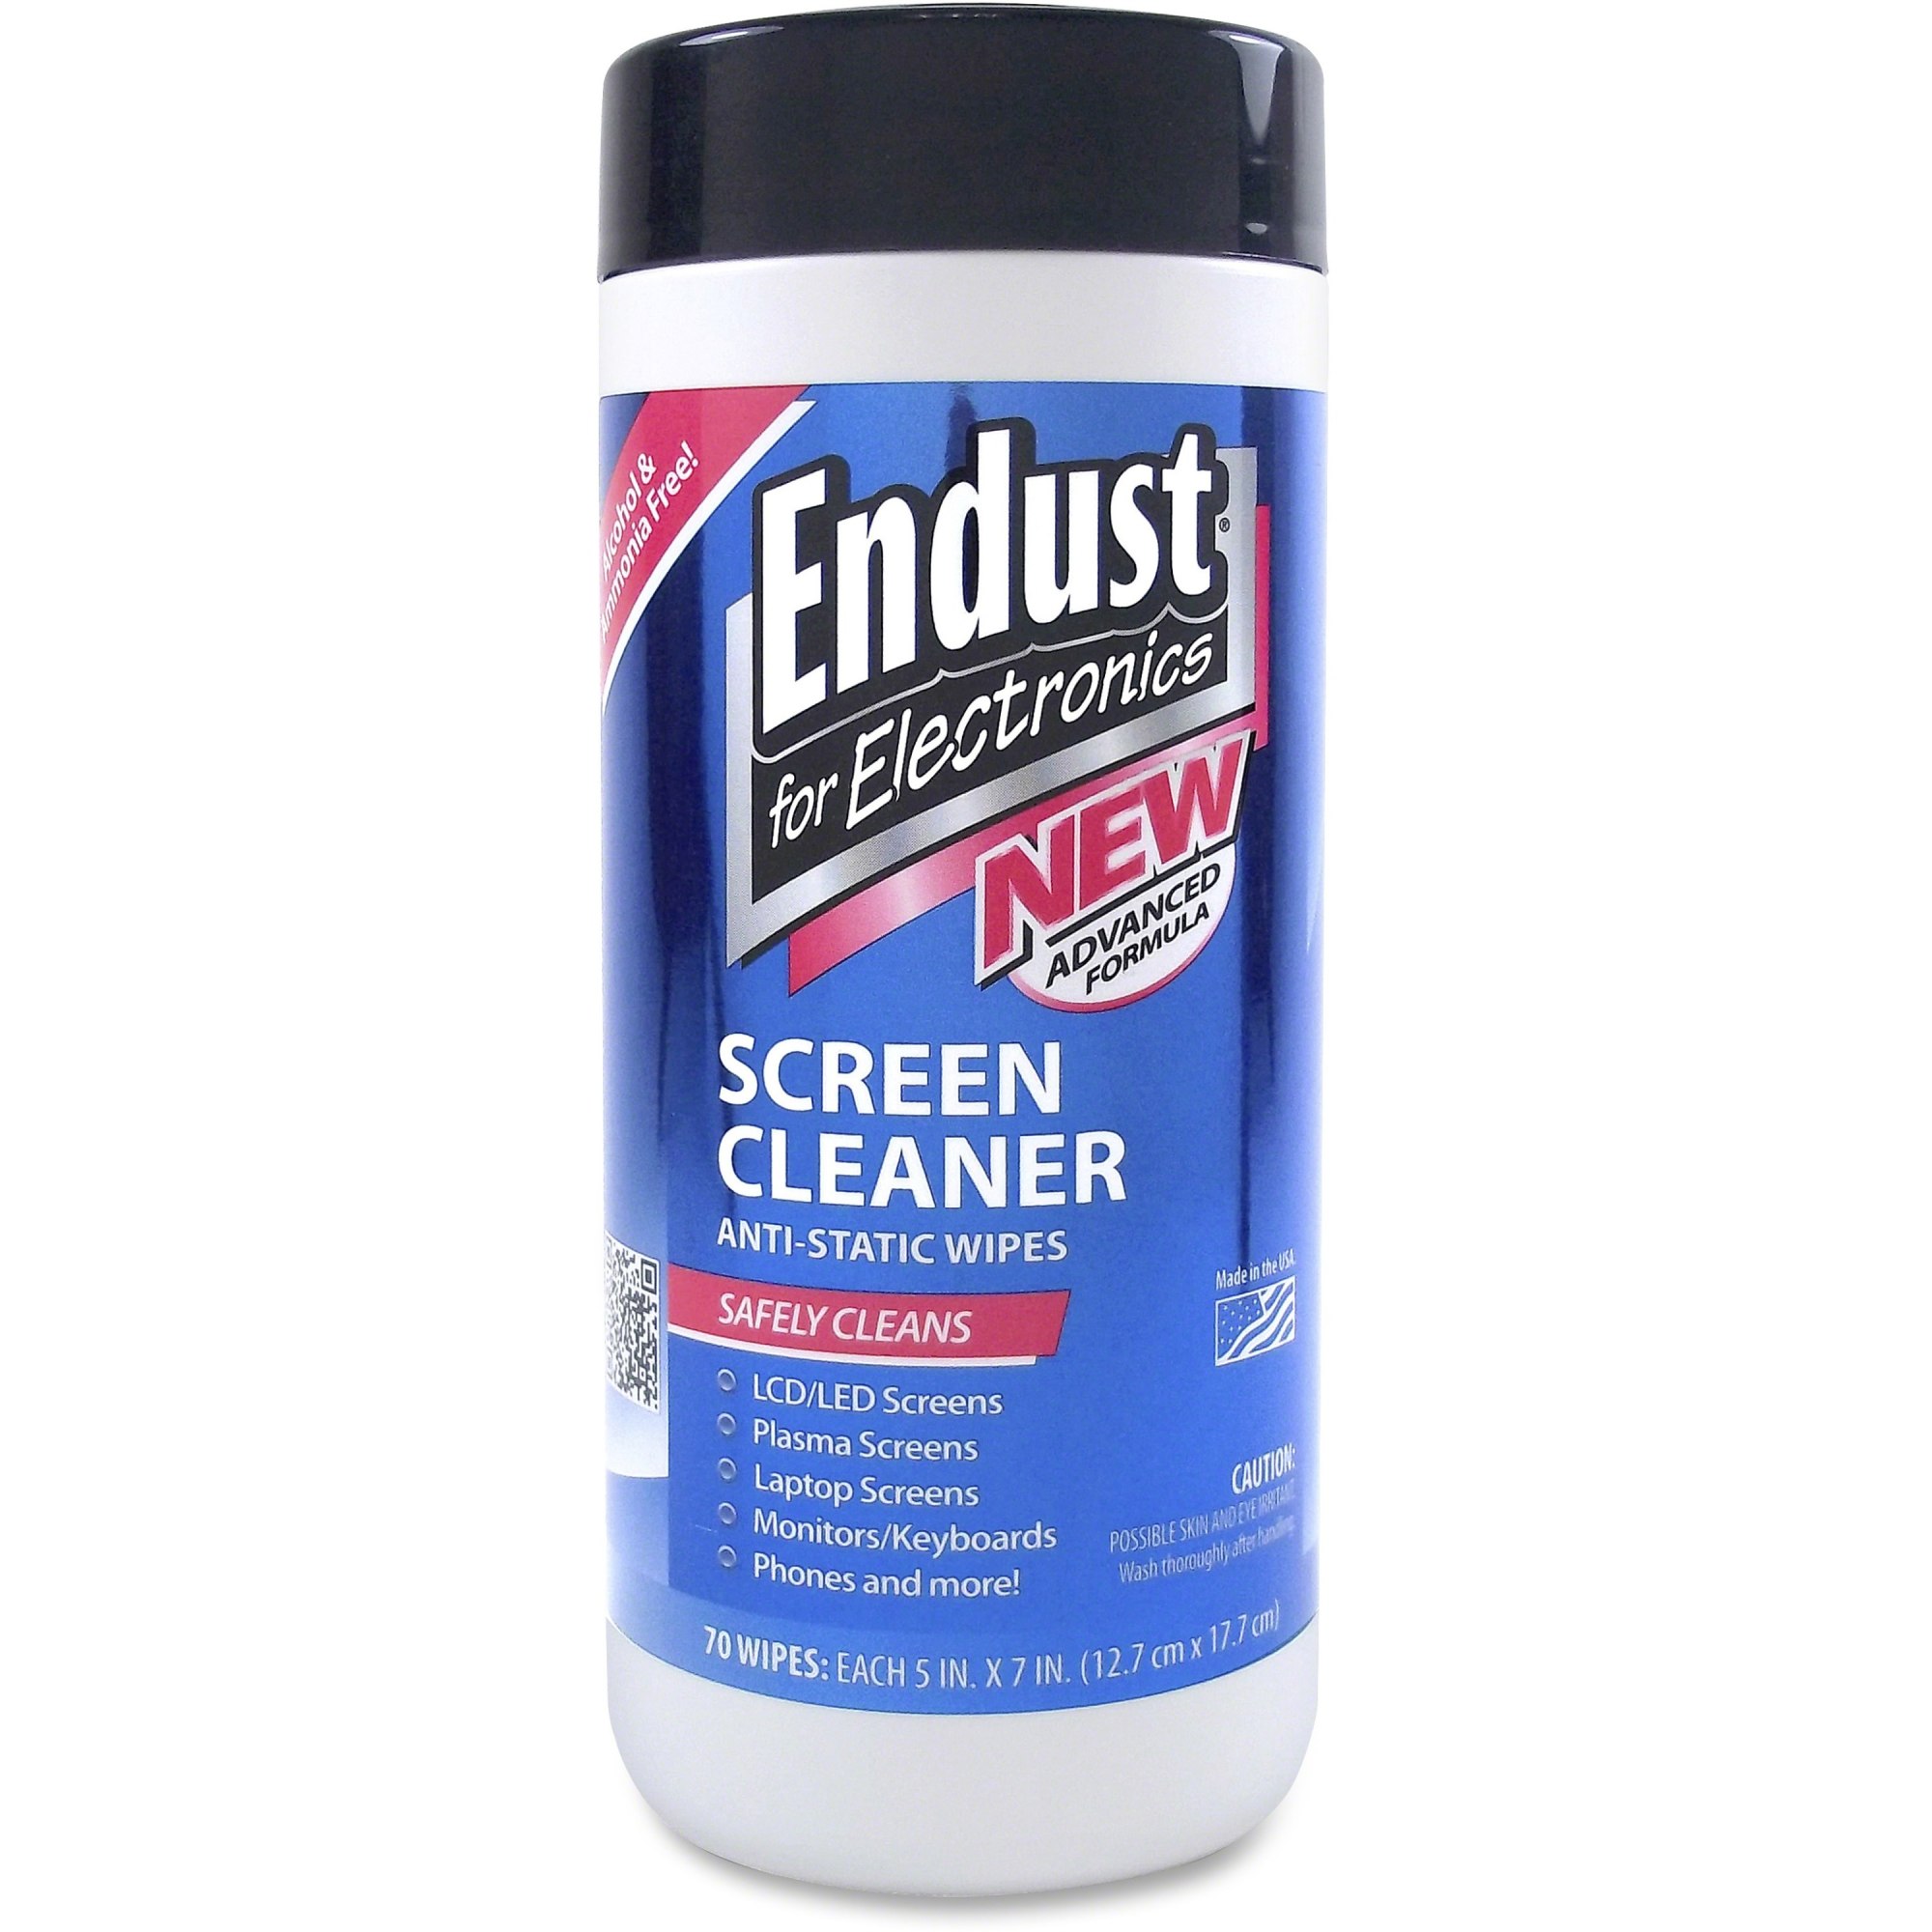 Endust for Electronics END11506 Anti-Static Wipes, 70 count - image 2 of 2